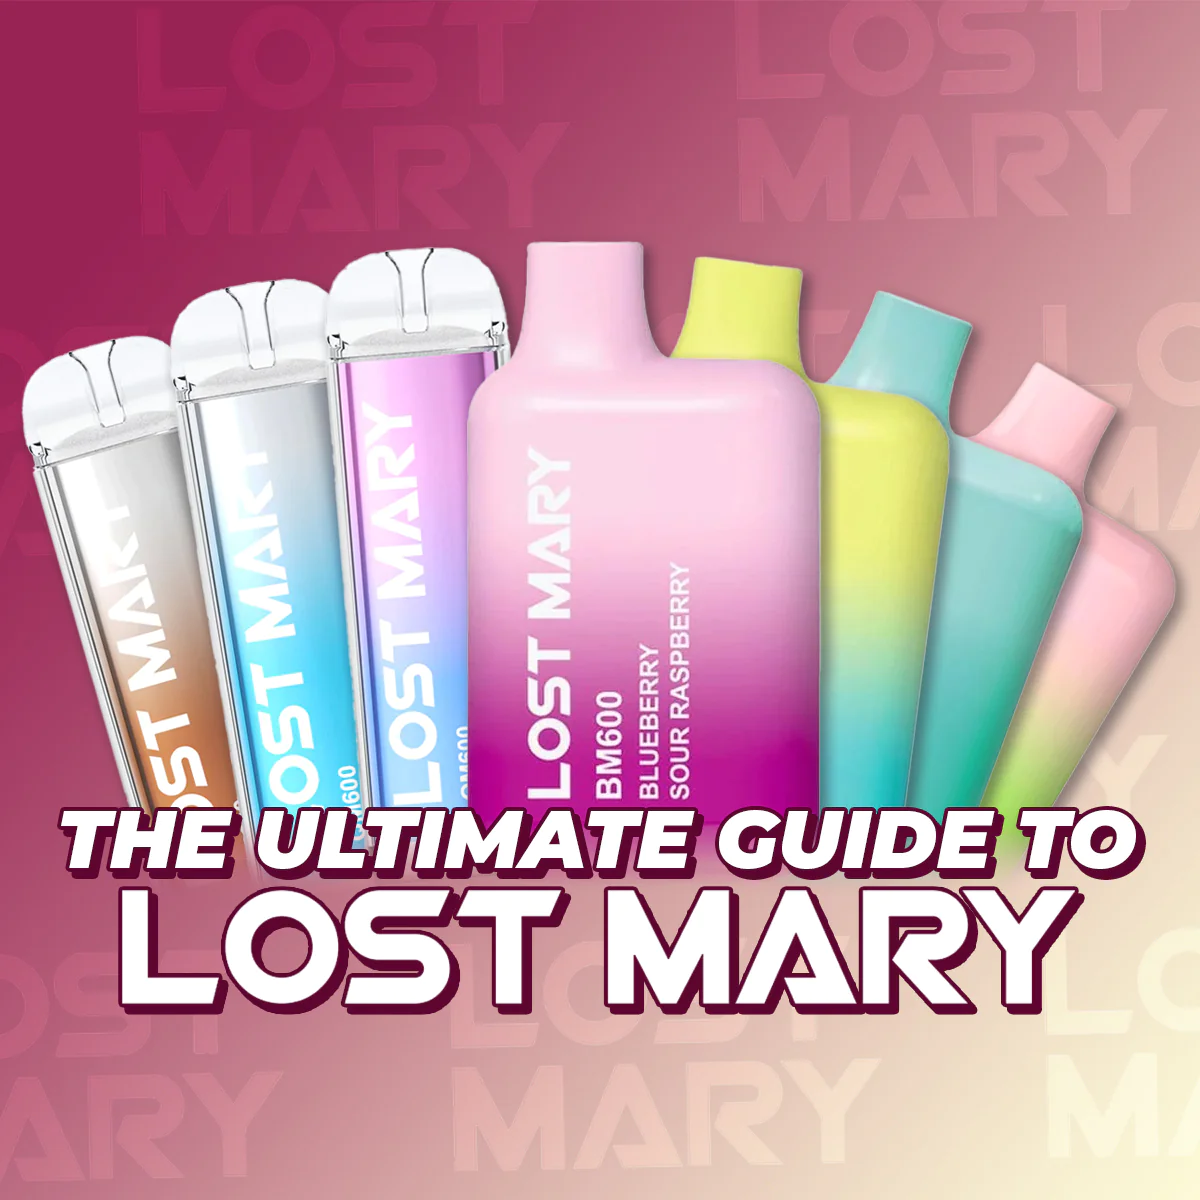 The Lost Mary Vape Starter Kit: A Comprehensive Guide